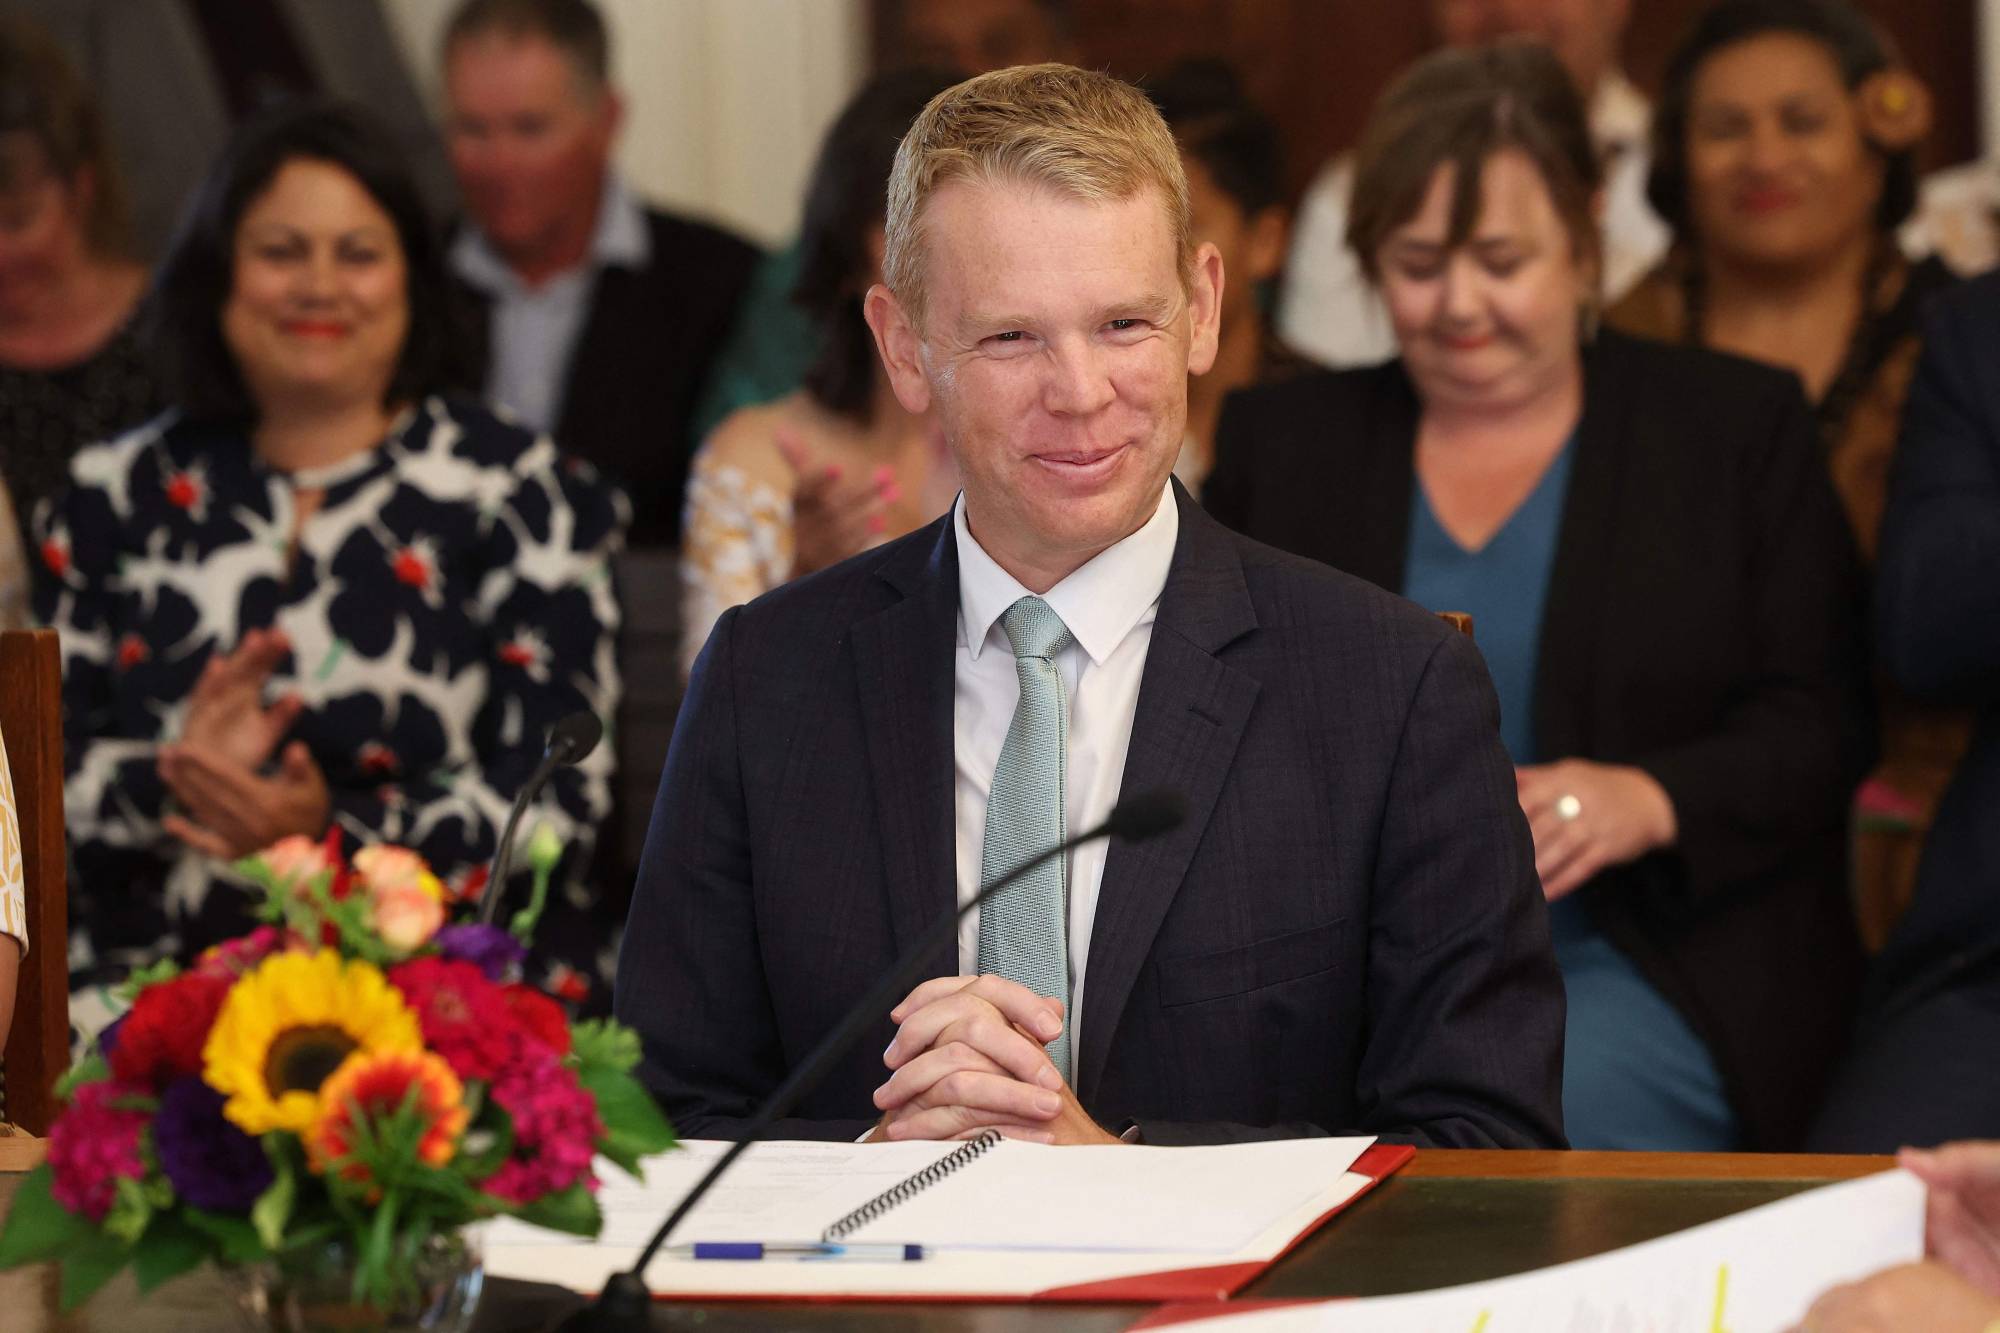 Chris Hipkins sworn in as New Zealand PM after Jacinda Ardern formally steps down